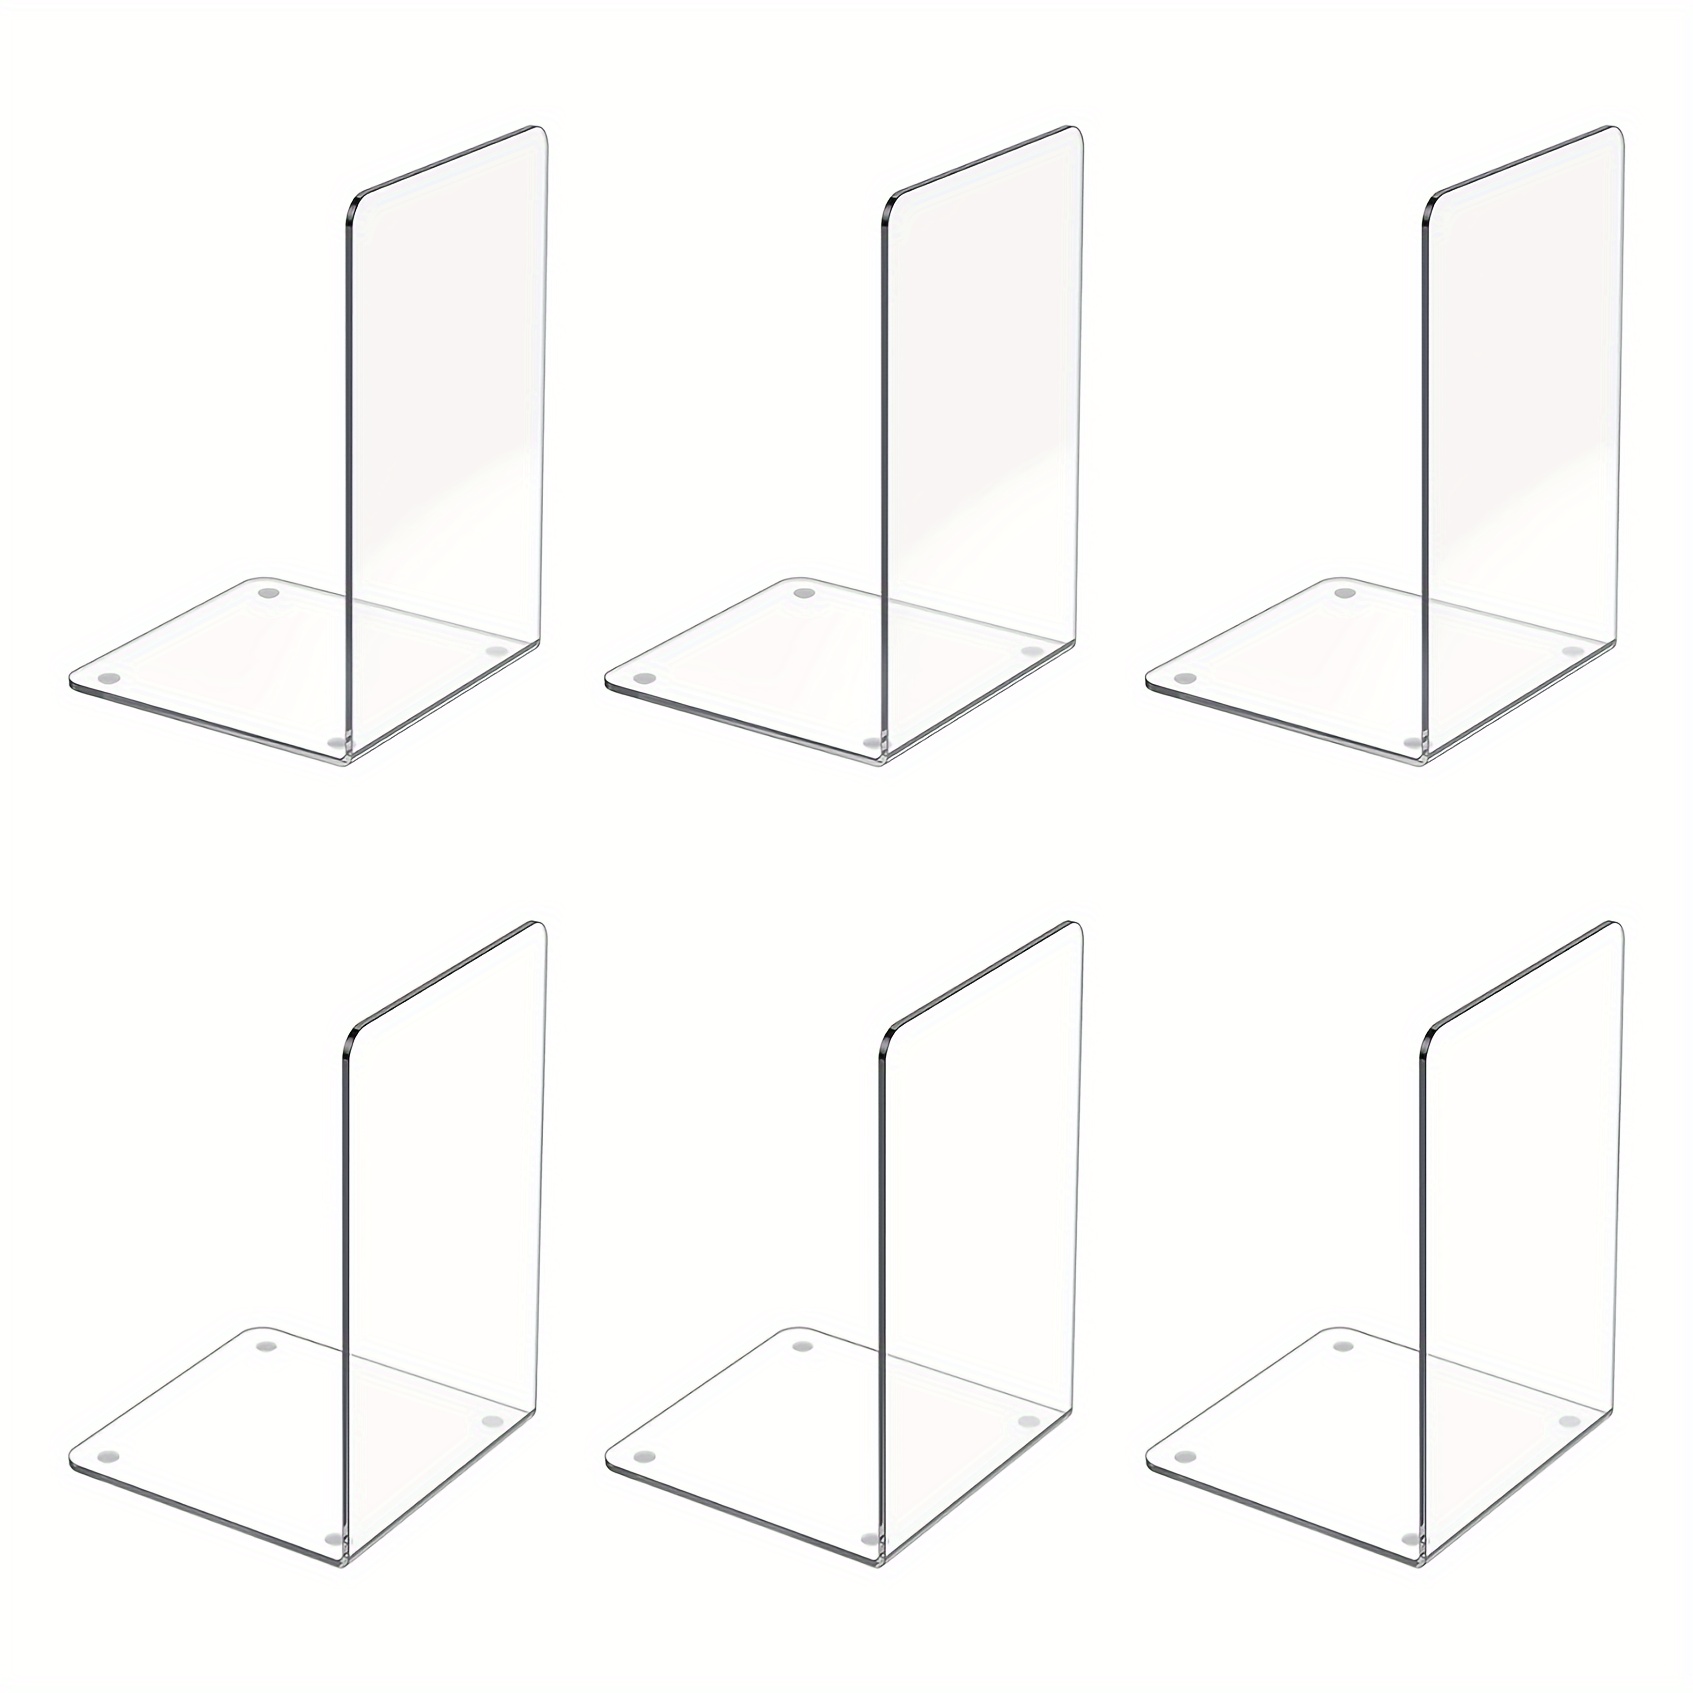 

6pcs Book Ends, Acrylic Bookends For Shelves, Clear Bookends For Heavy Books, Desk Organizer, Books, Small Cute Transparent Plastic Book Dividers Holders